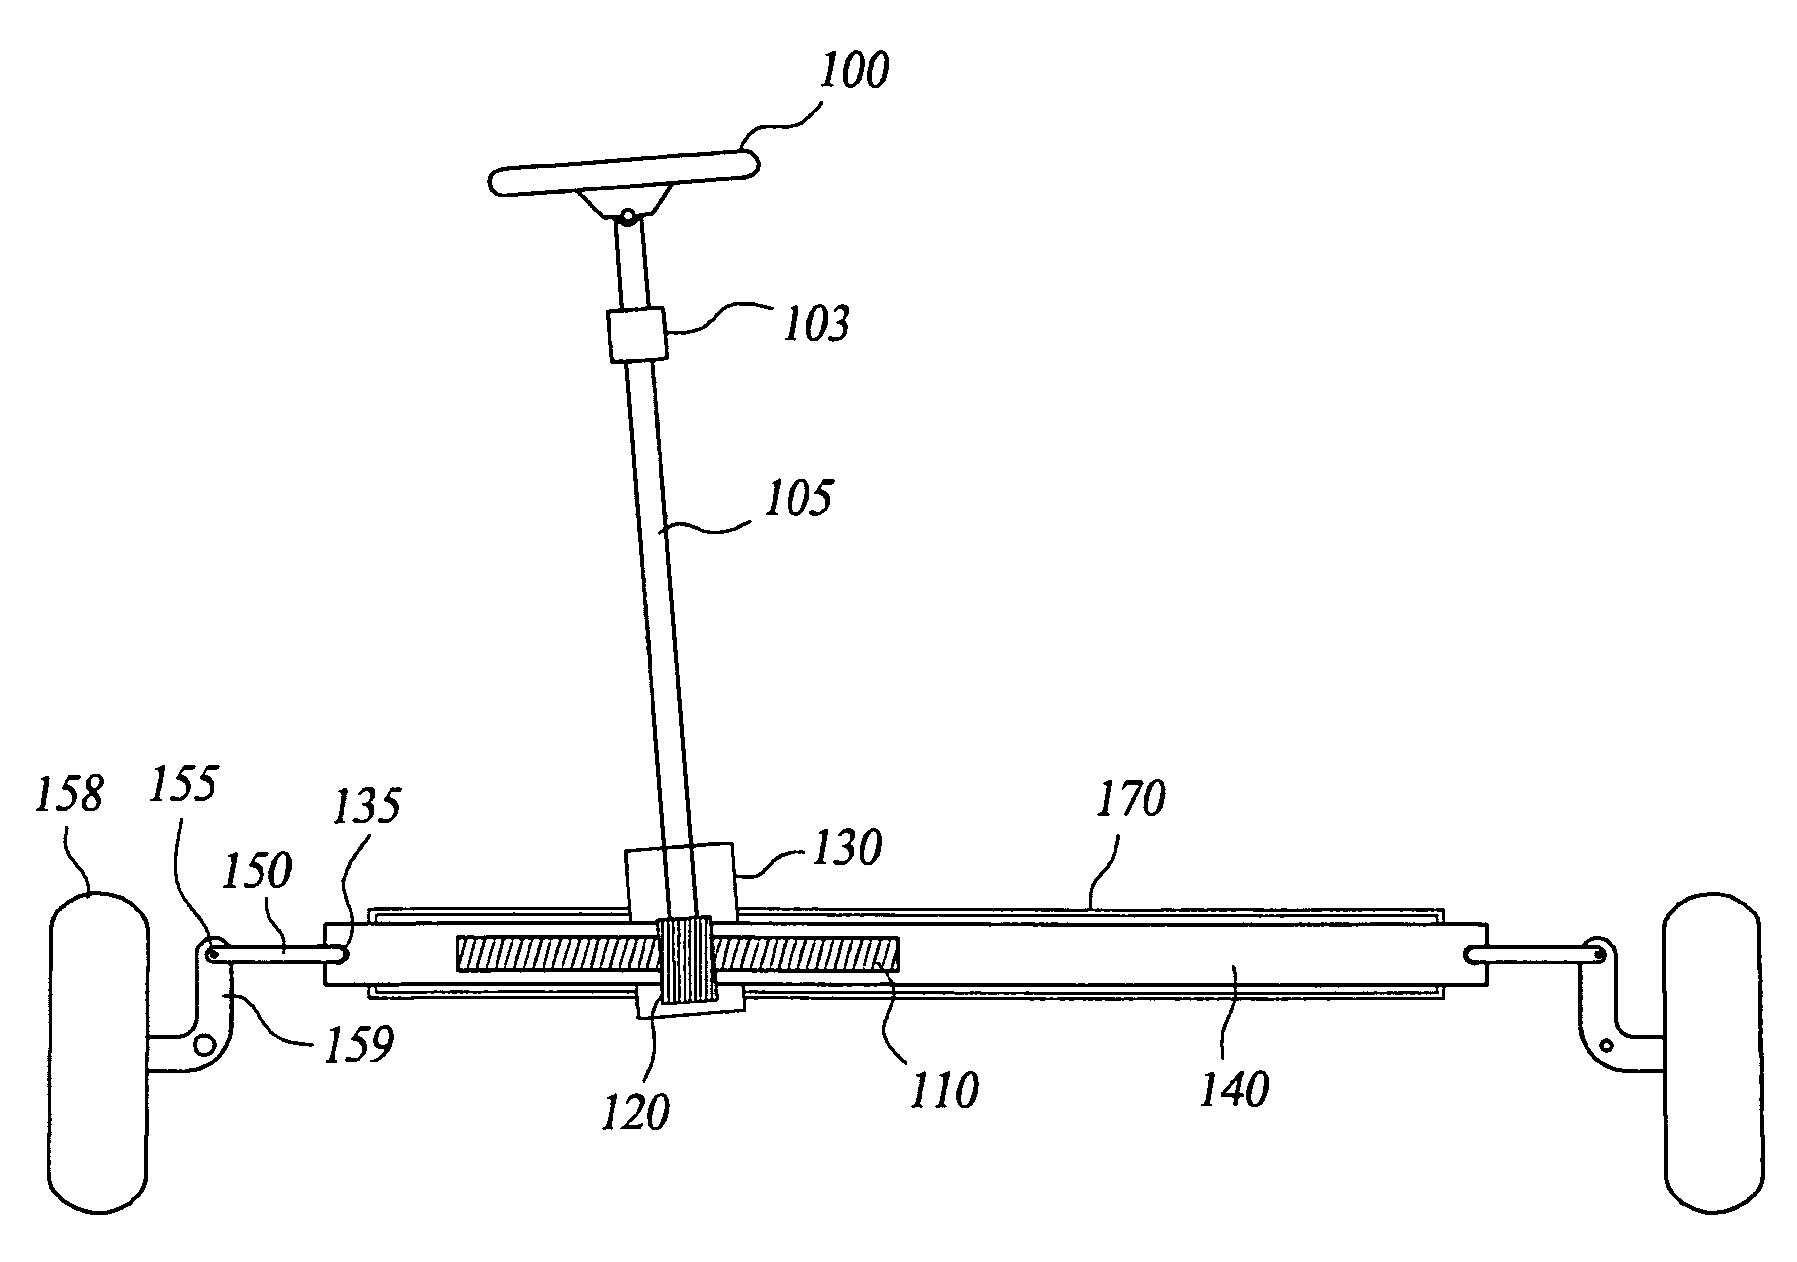 Apparatus for automatically adjusting clearance of support yoke